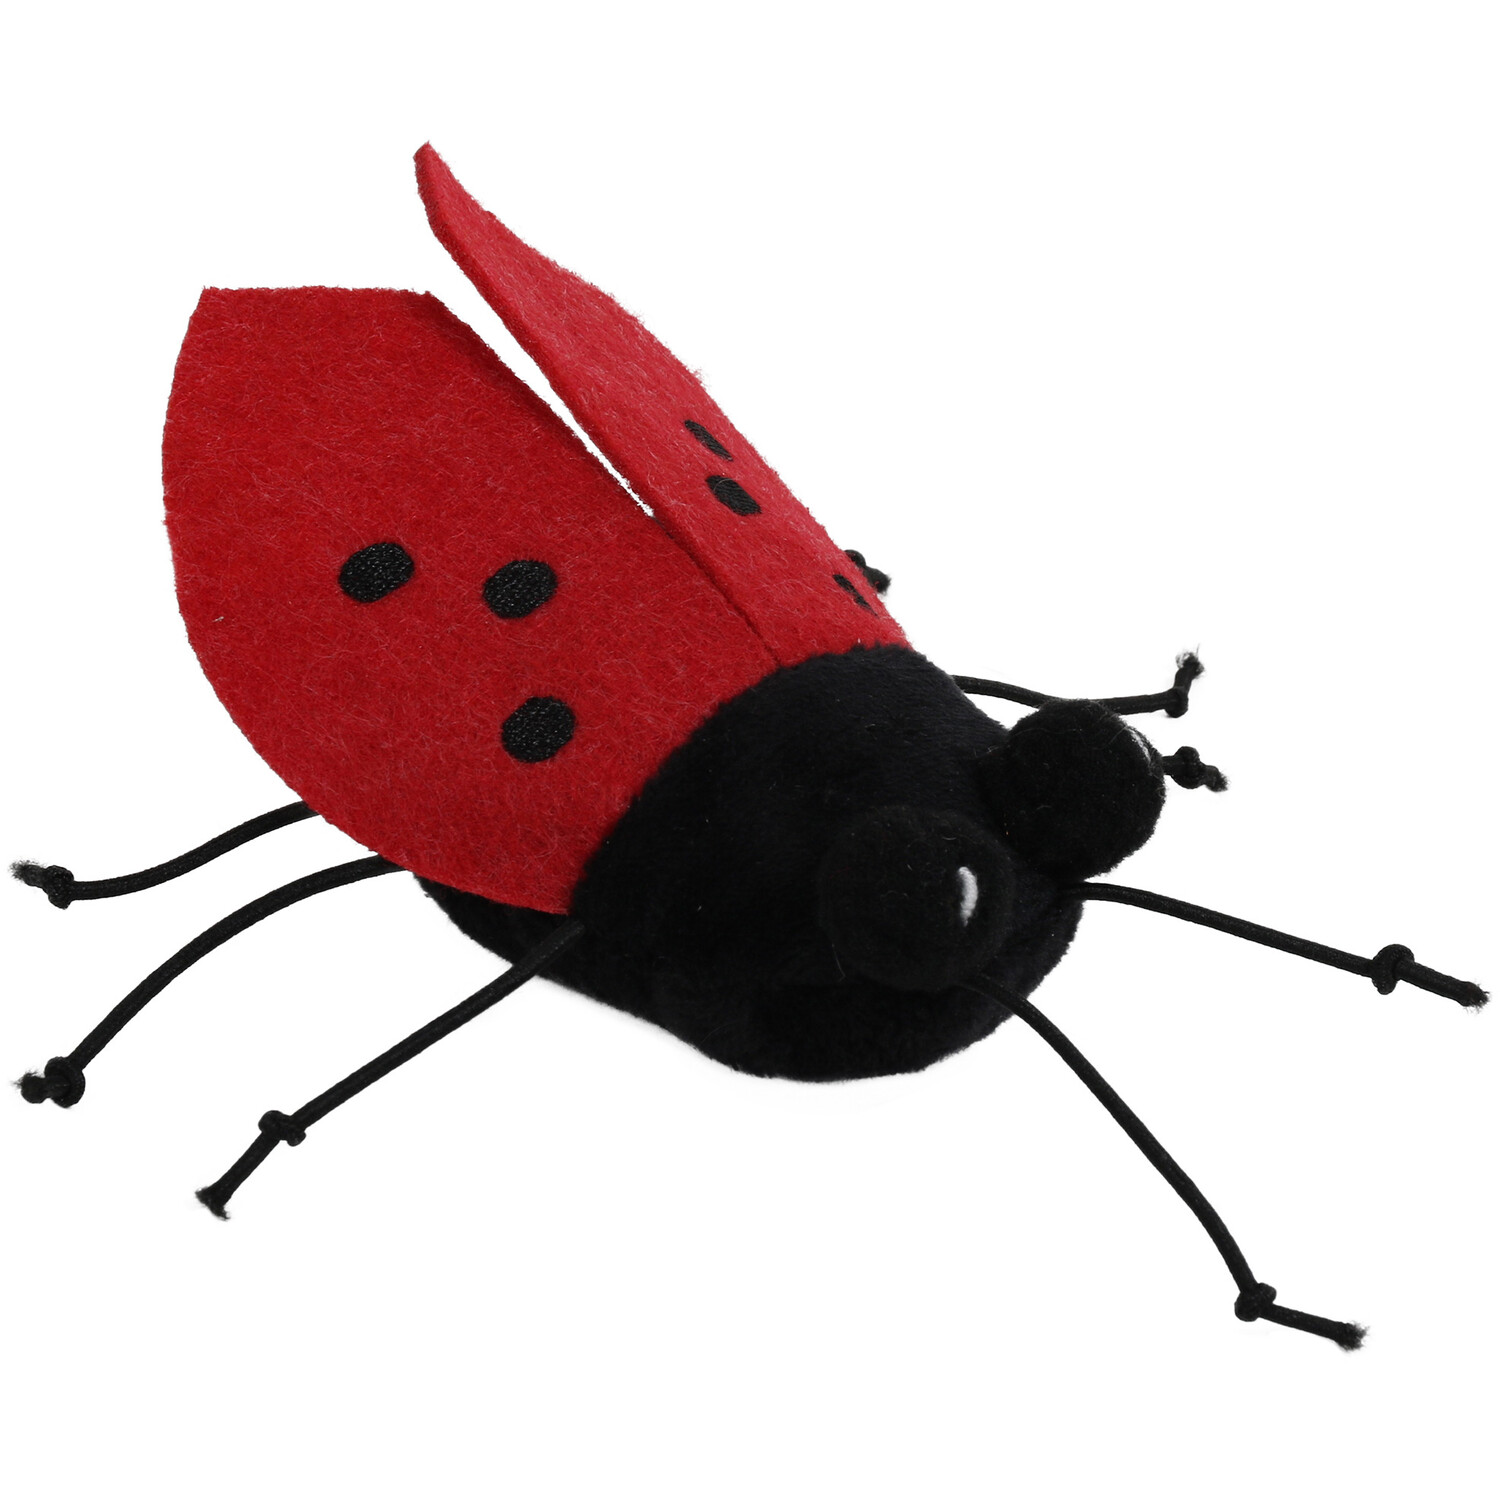 Buzzing Insect Cat Toy - Red Image 3